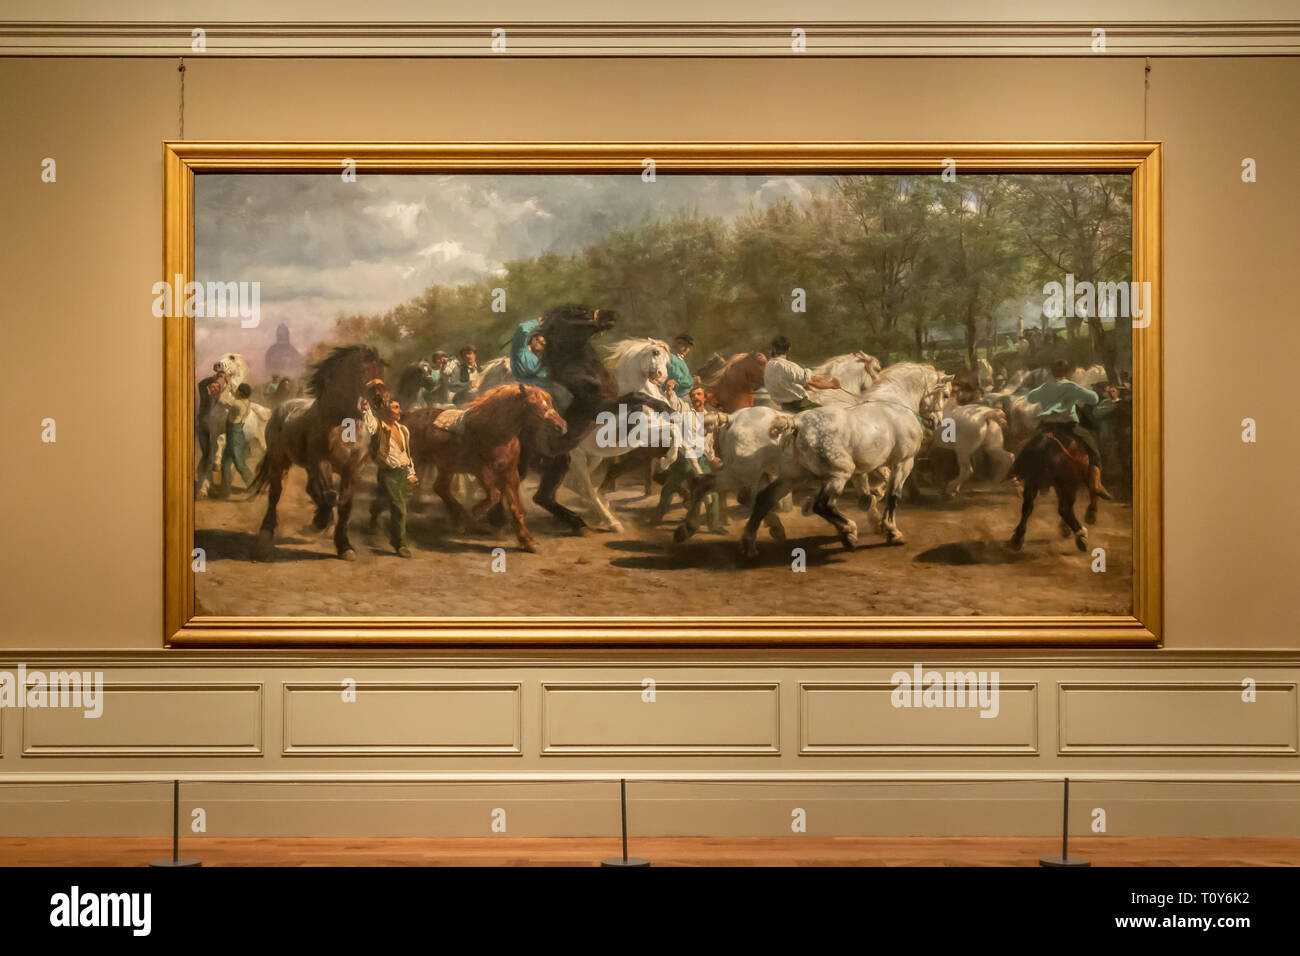 The Horse Fair is an oil on canvas painting by Rosa Bonheur on display at the Metropolitan Museum of Art in New York City. Stock Photo